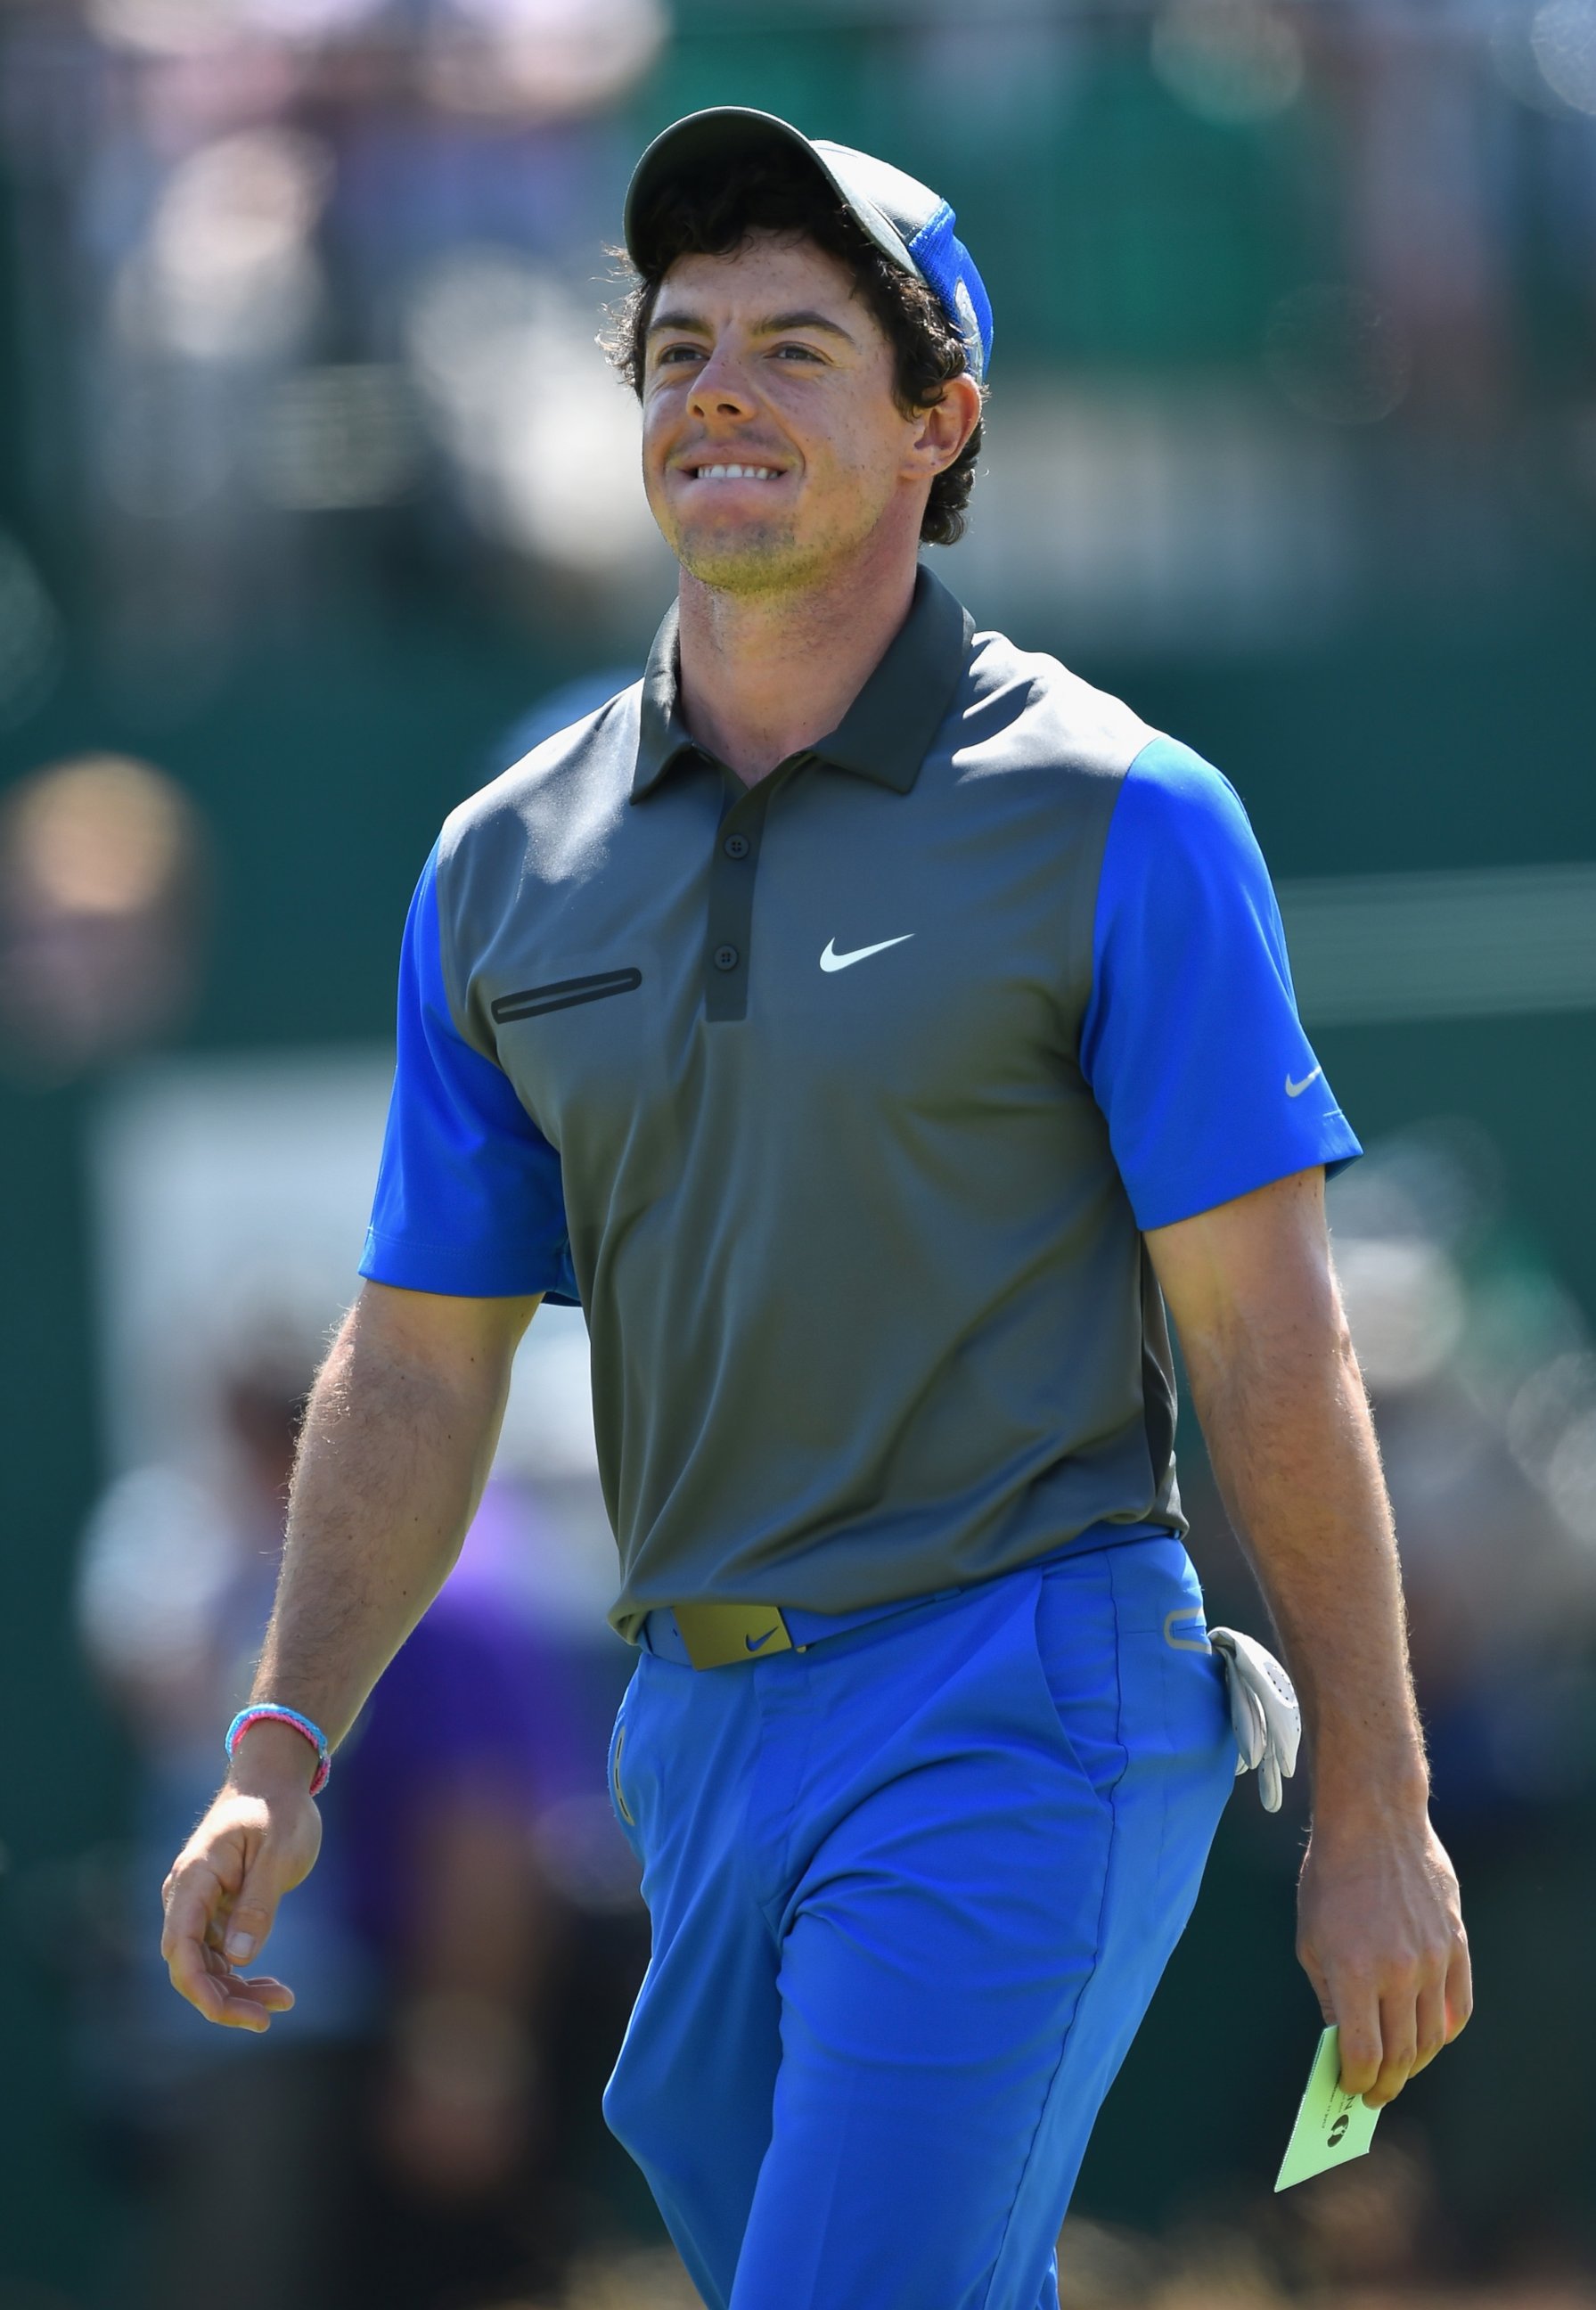 PHOTO: Rory McIlroy of Northern Ireland walks off the 18th green during the first round of The 143rd Open Championship at Royal Liverpool on July 17, 2014 in Hoylake, England.